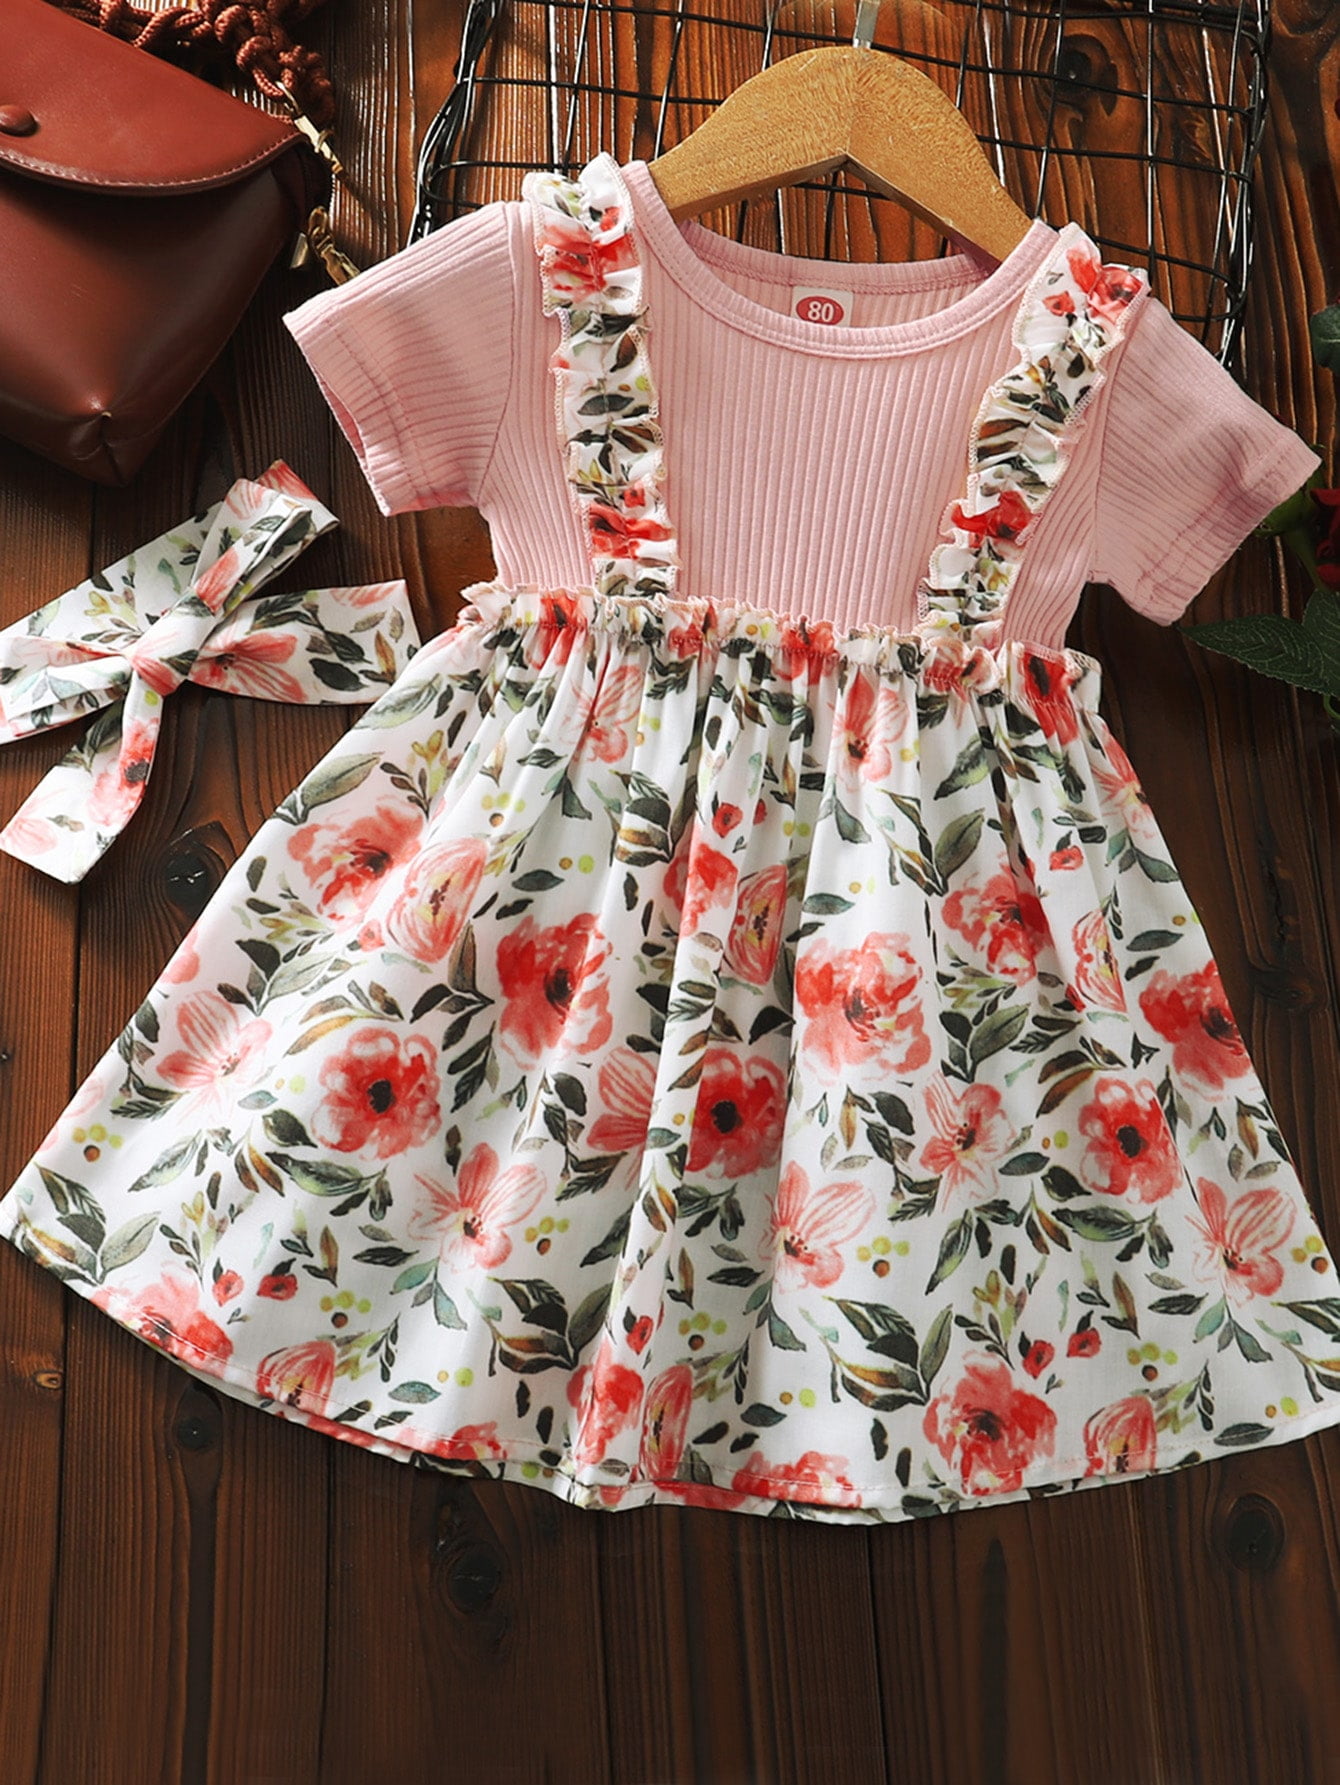 Details about   Baby Girl Red Rose Floral Dress/Headband Set 